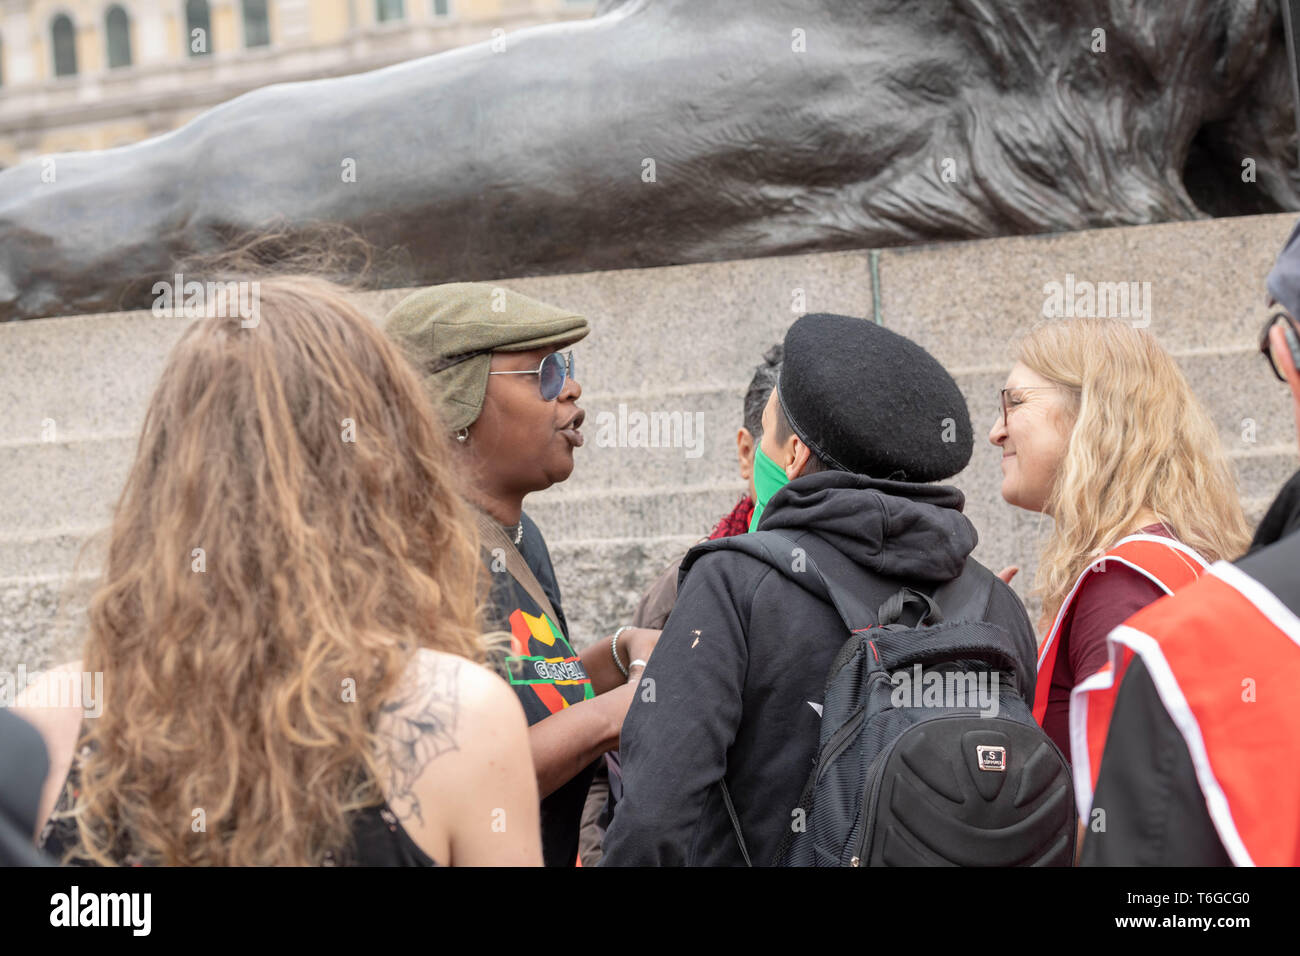 London, UK. 1st May 2019. May Day Labour rally and March with Trade Unions and international organsiations celebrating Labour Day in Trafalgar Square There was clashes between pro and anti transgender rights Credit: Ian Davidson/Alamy Live News Stock Photo